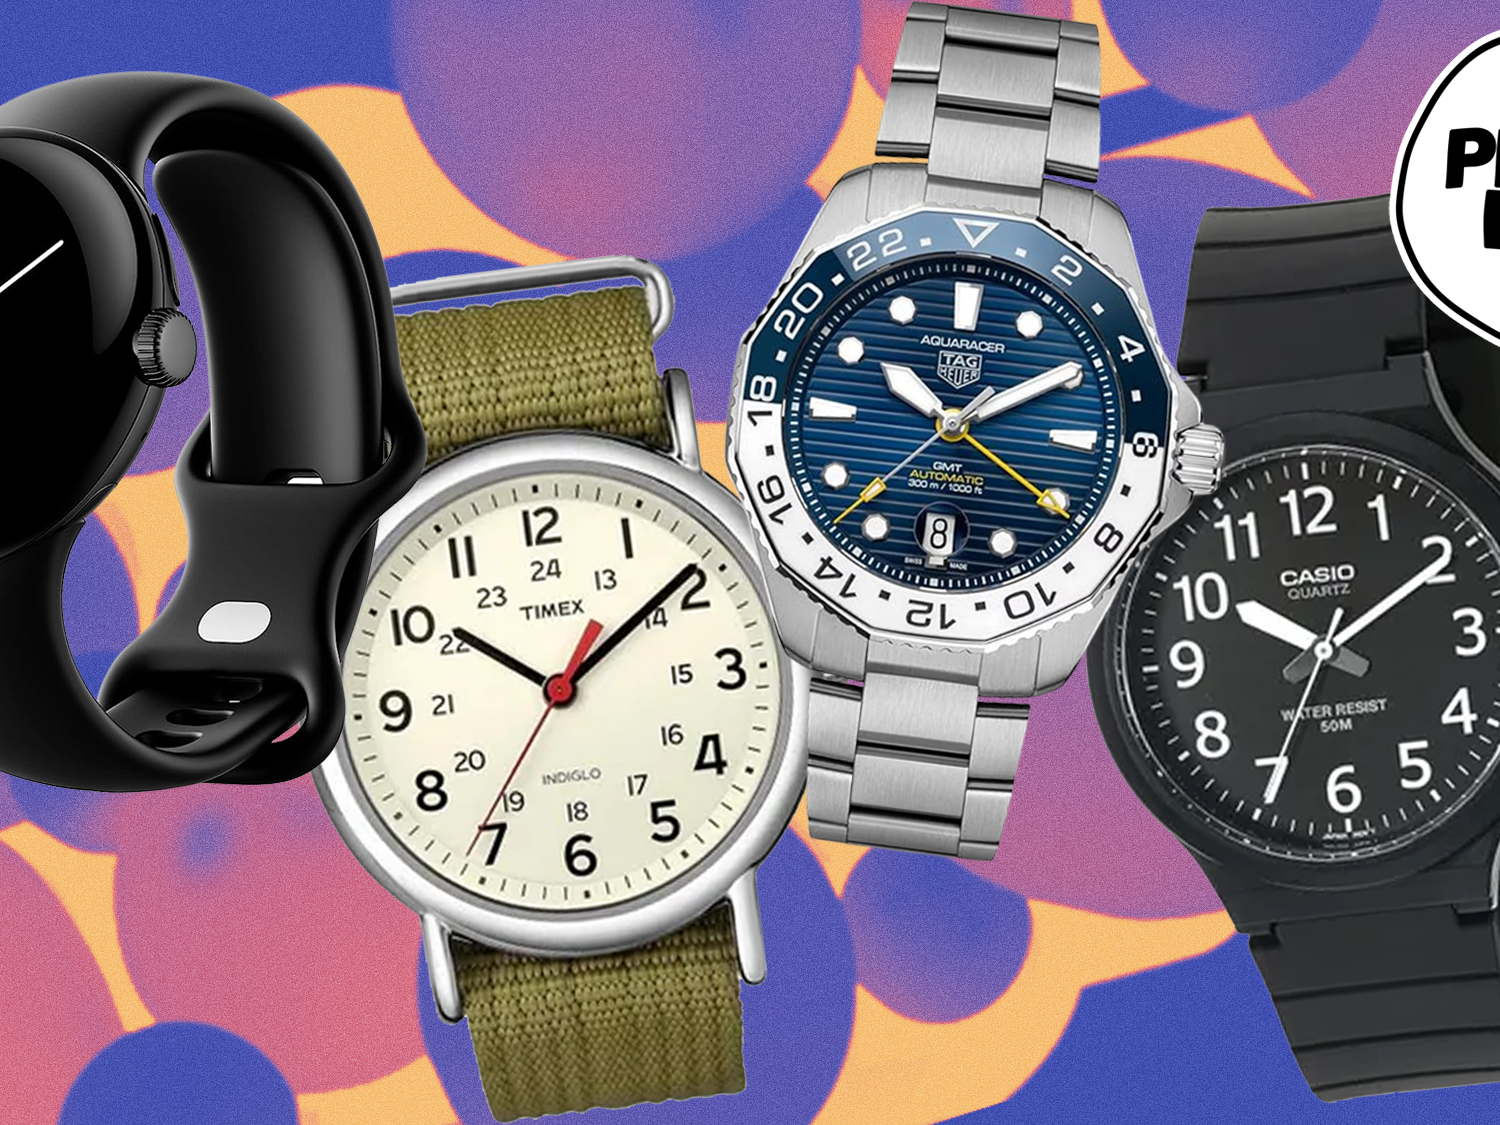 Welcome to the Super Bowl of Affordable Watches